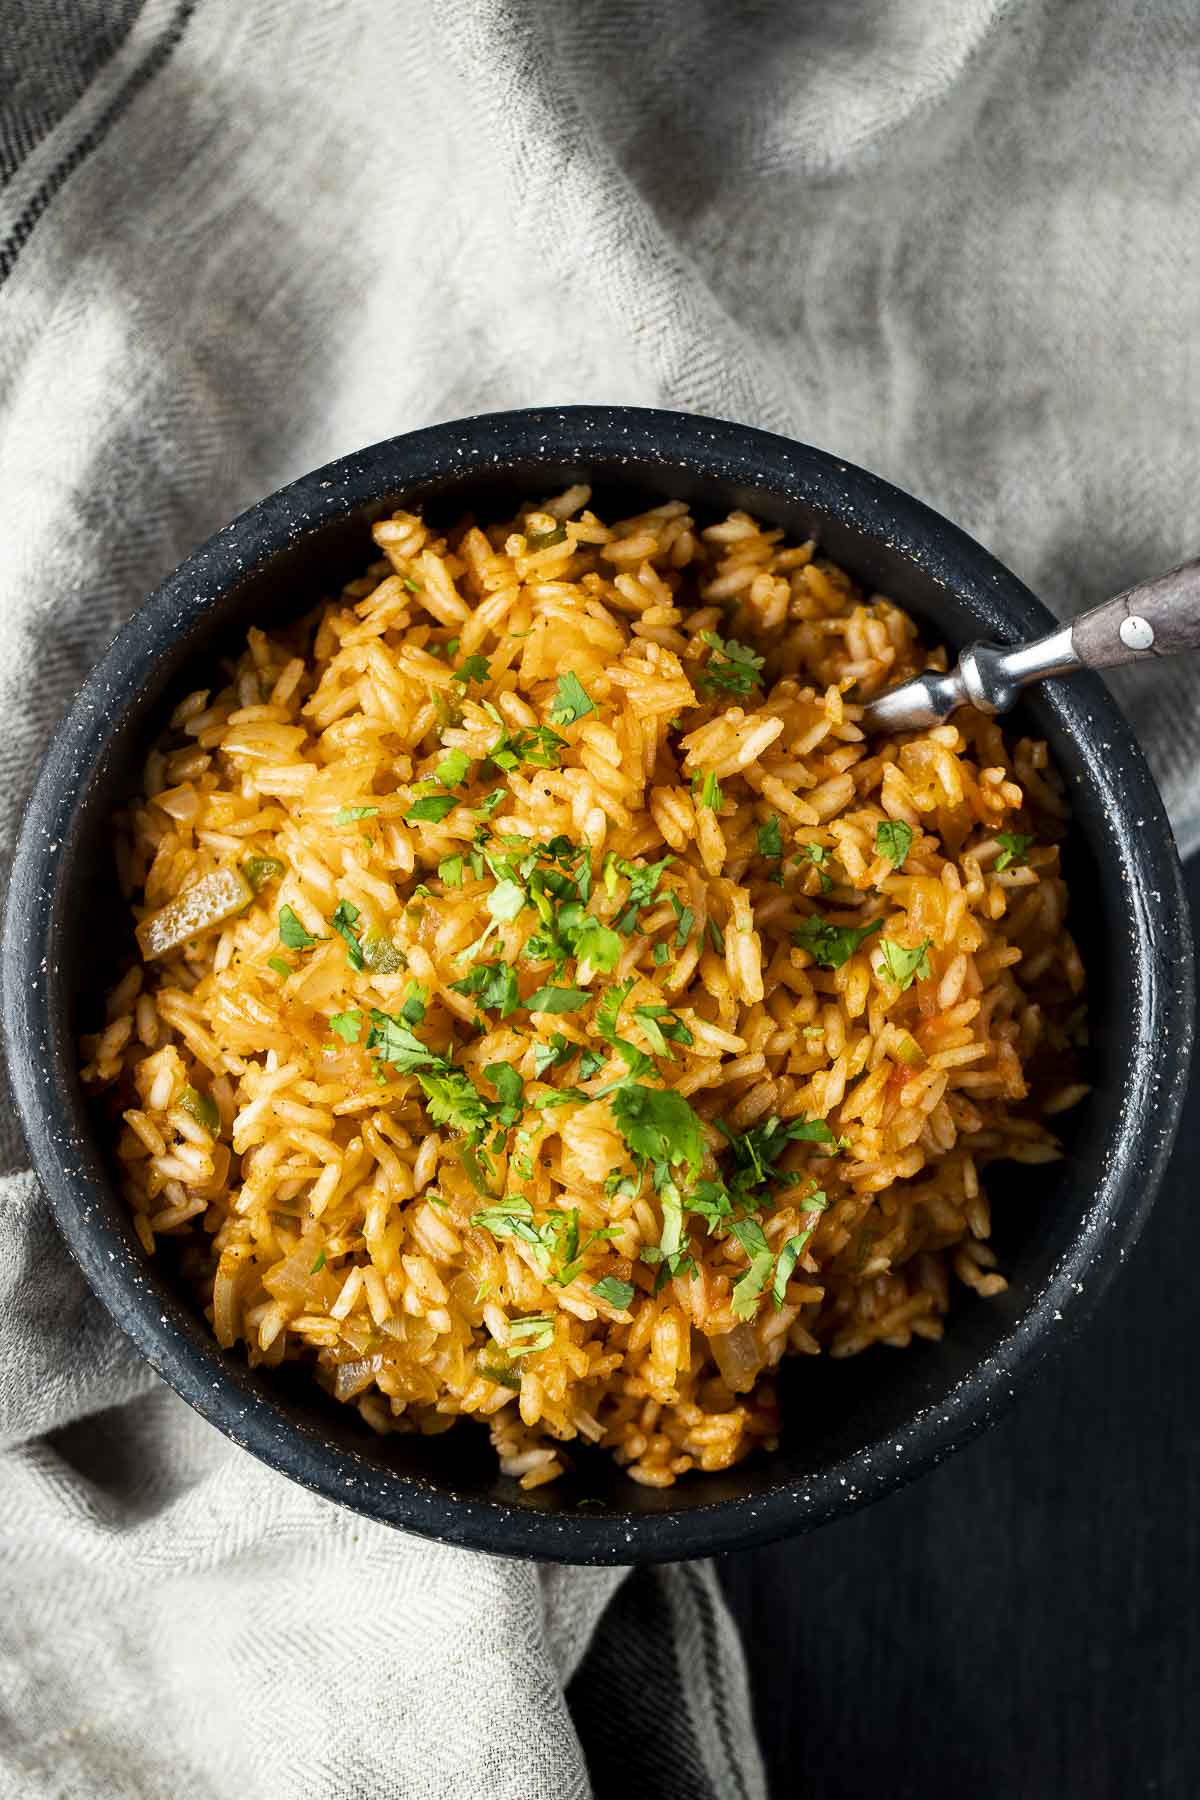 https://www.wenthere8this.com/wp-content/uploads/2021/05/instant-pot-spanish-rice-5.jpg